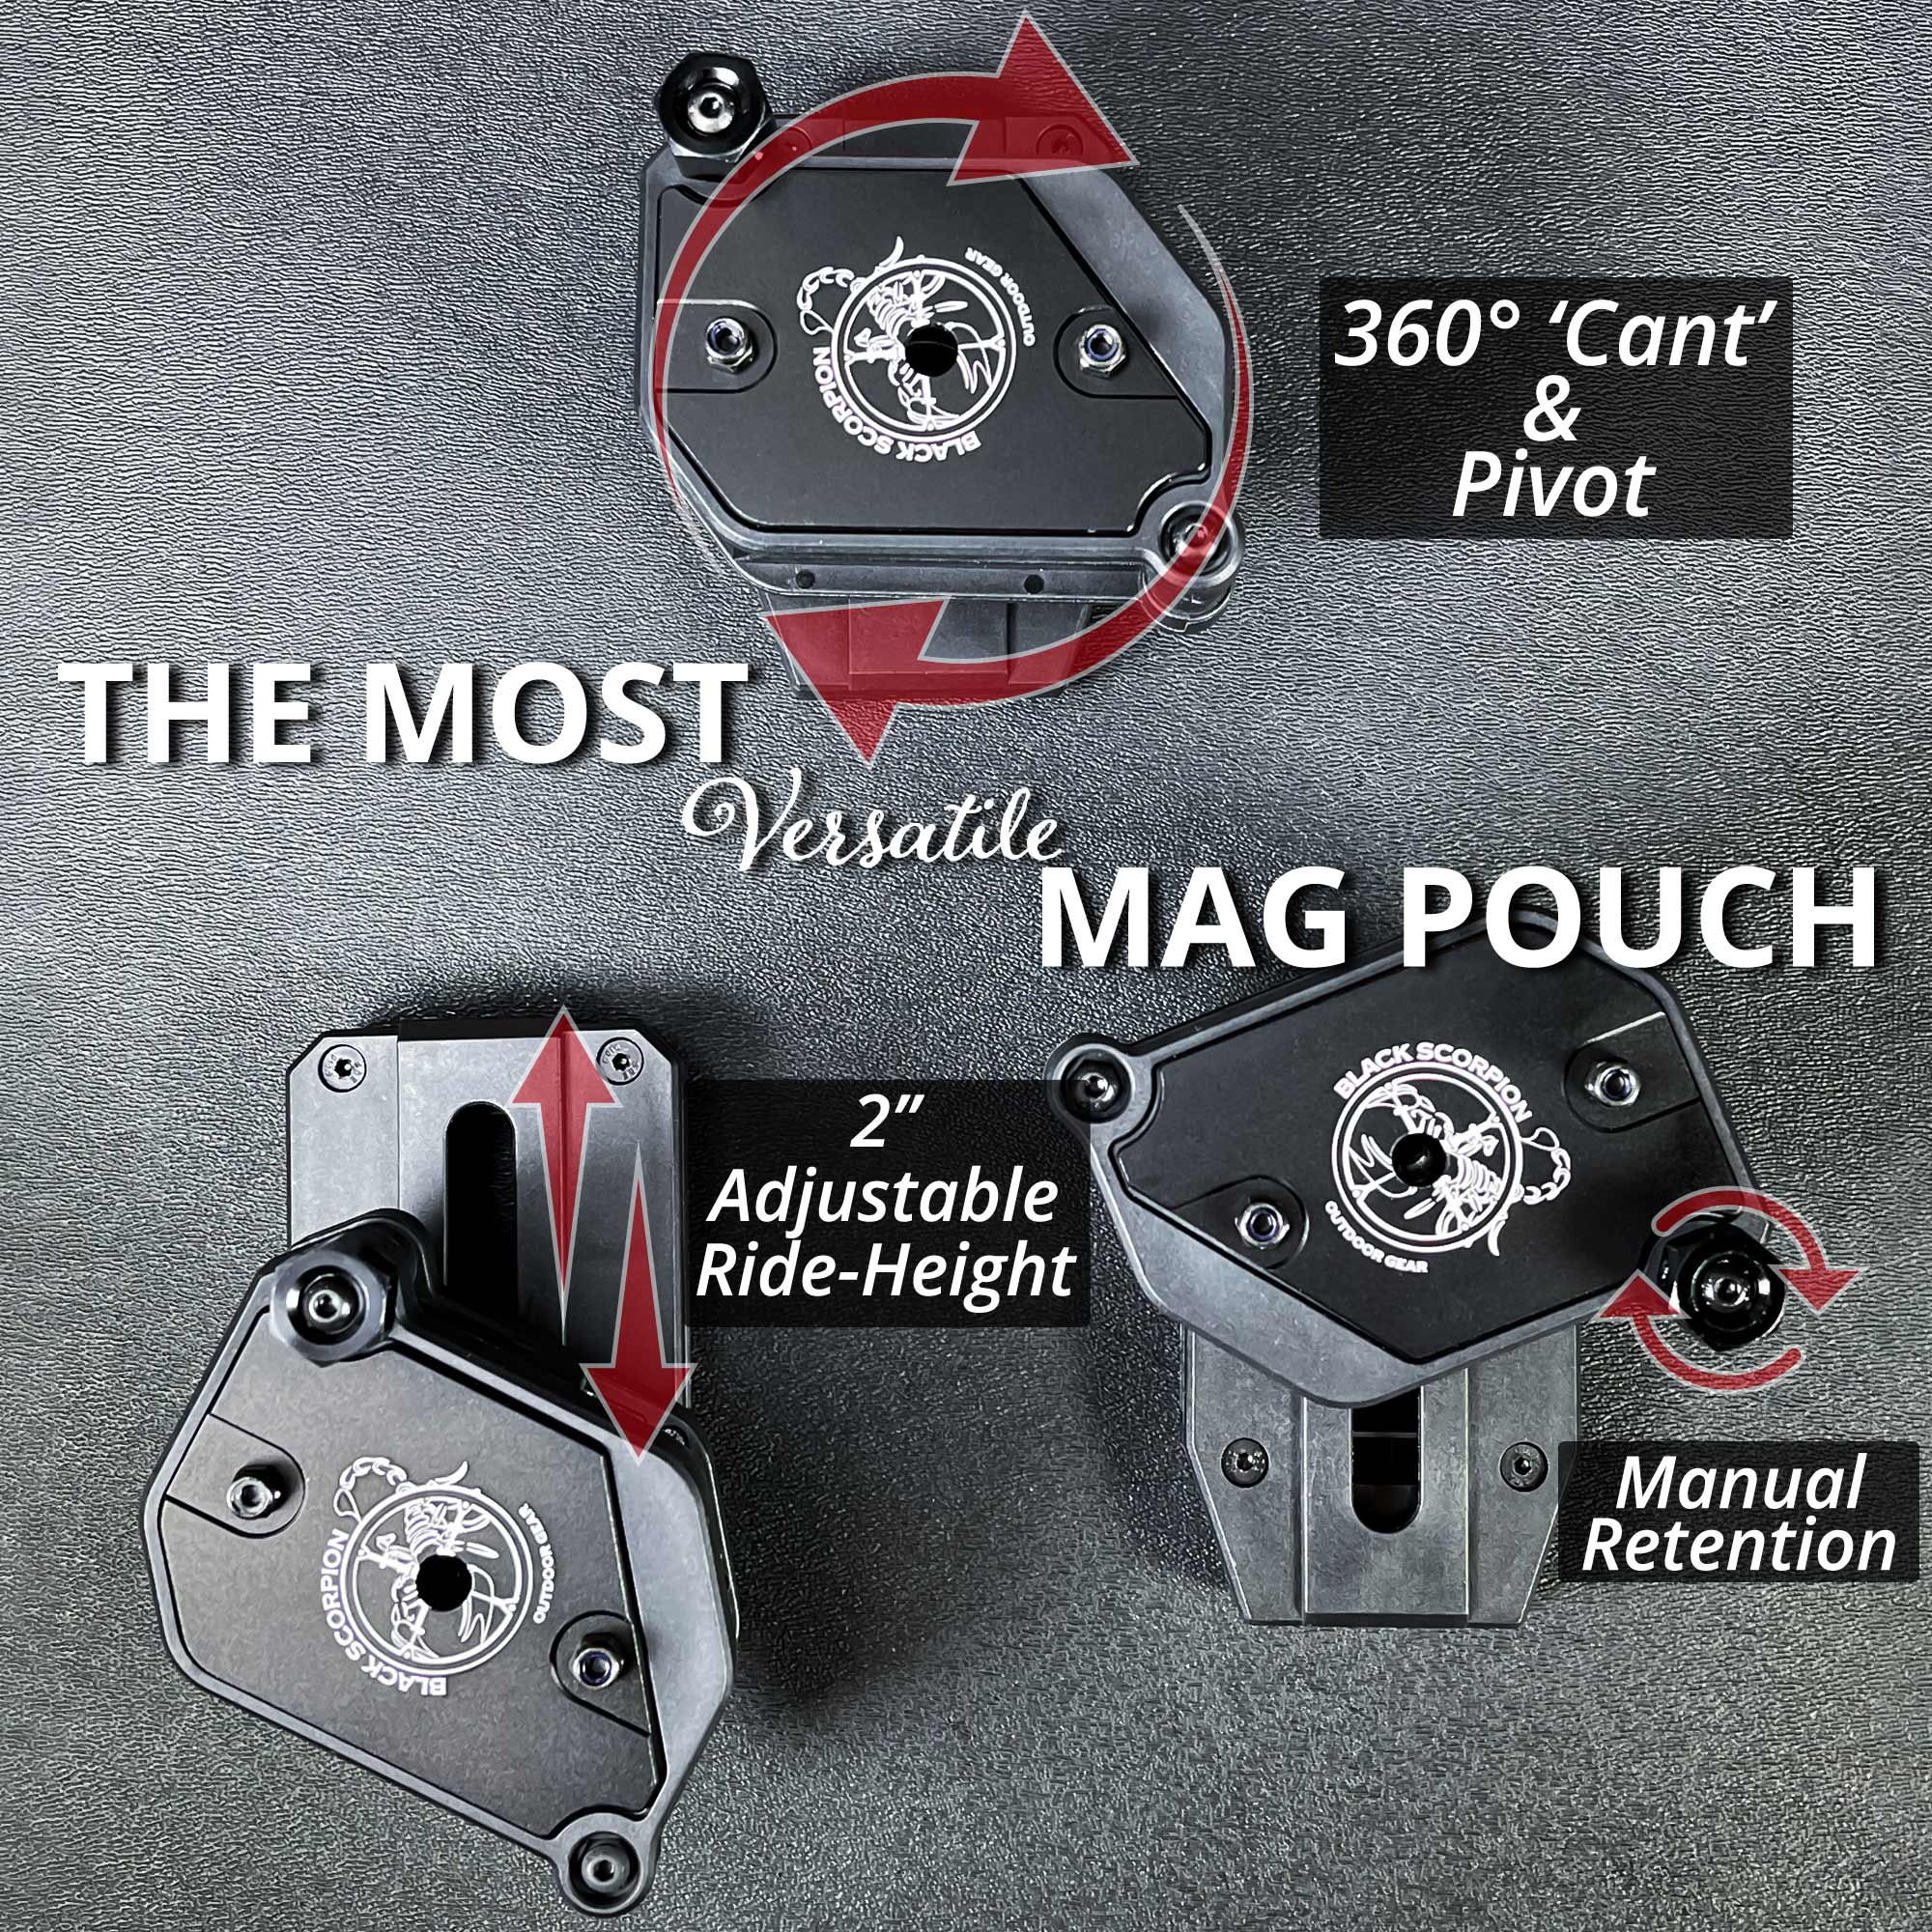 Ambidextrous Single/Double Stack Competition Magazine Pouch